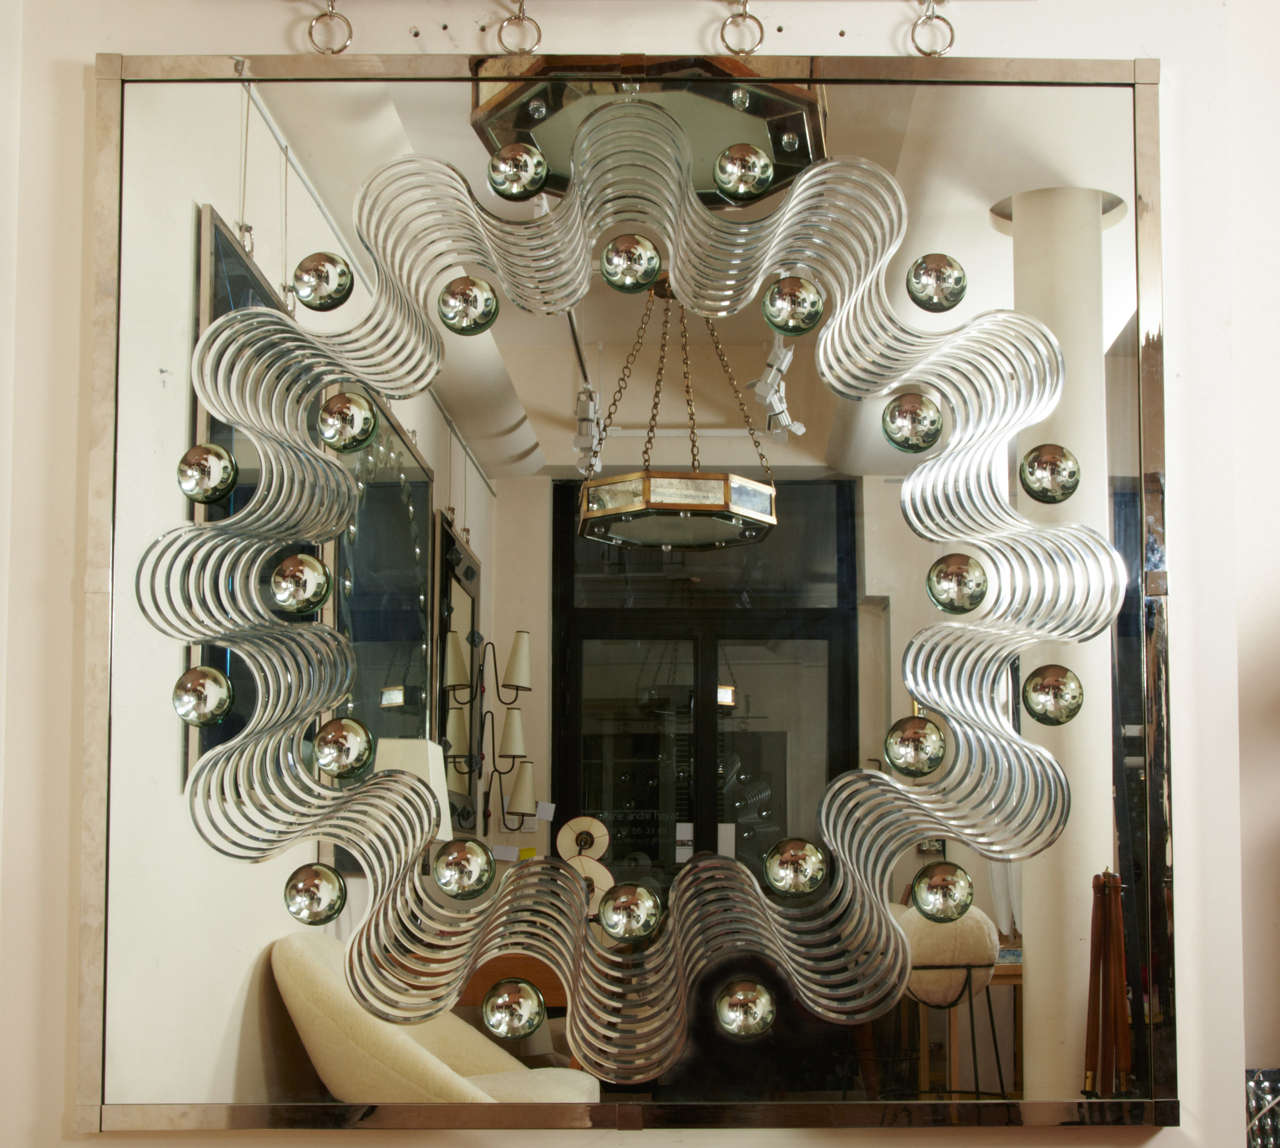 Spectacular large bubble mirror with engraved wave design and nickeled bronze frame and ring hanger.